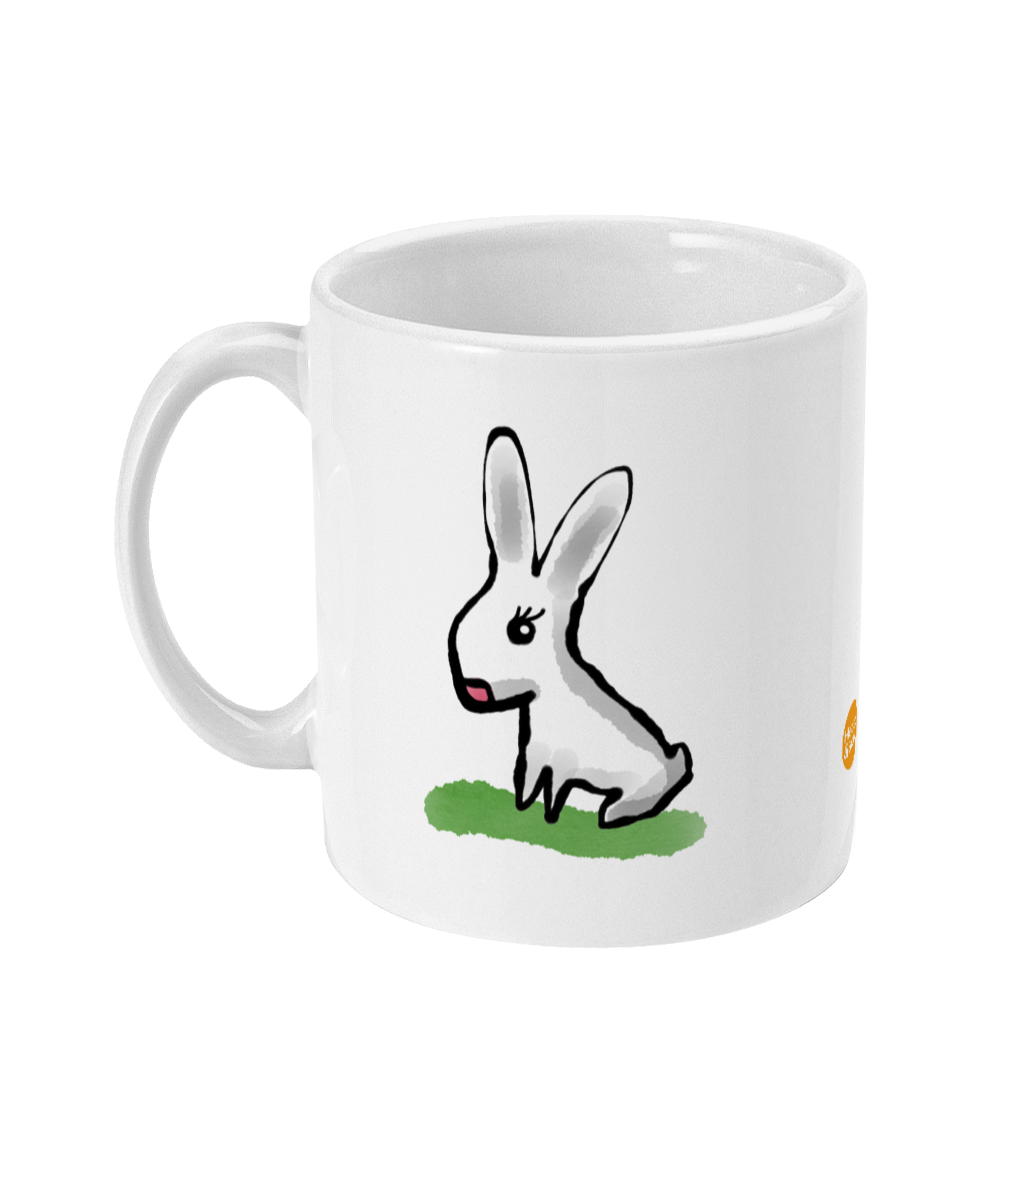 Cute Bunny design coffee mug by Hector and Bone Left View